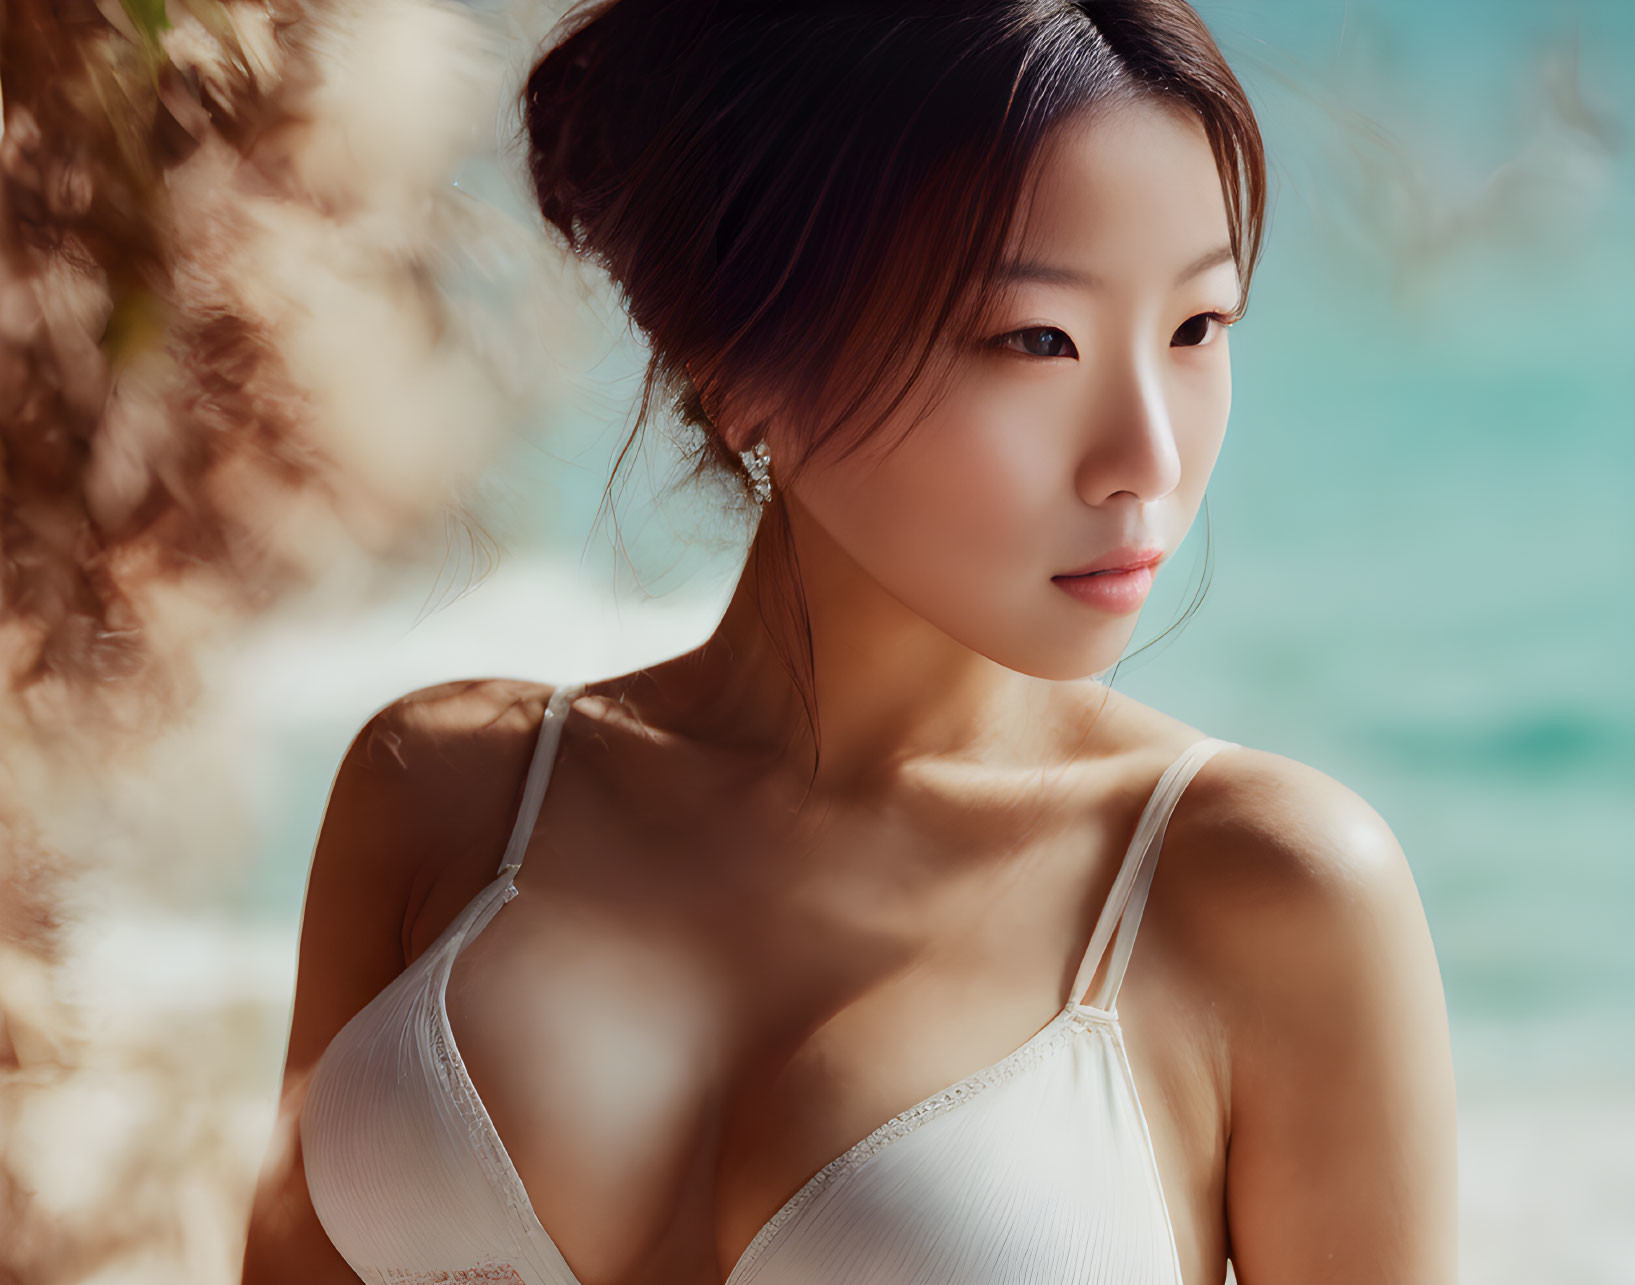 Woman in White Swimsuit Posing on Beach with Ocean Background